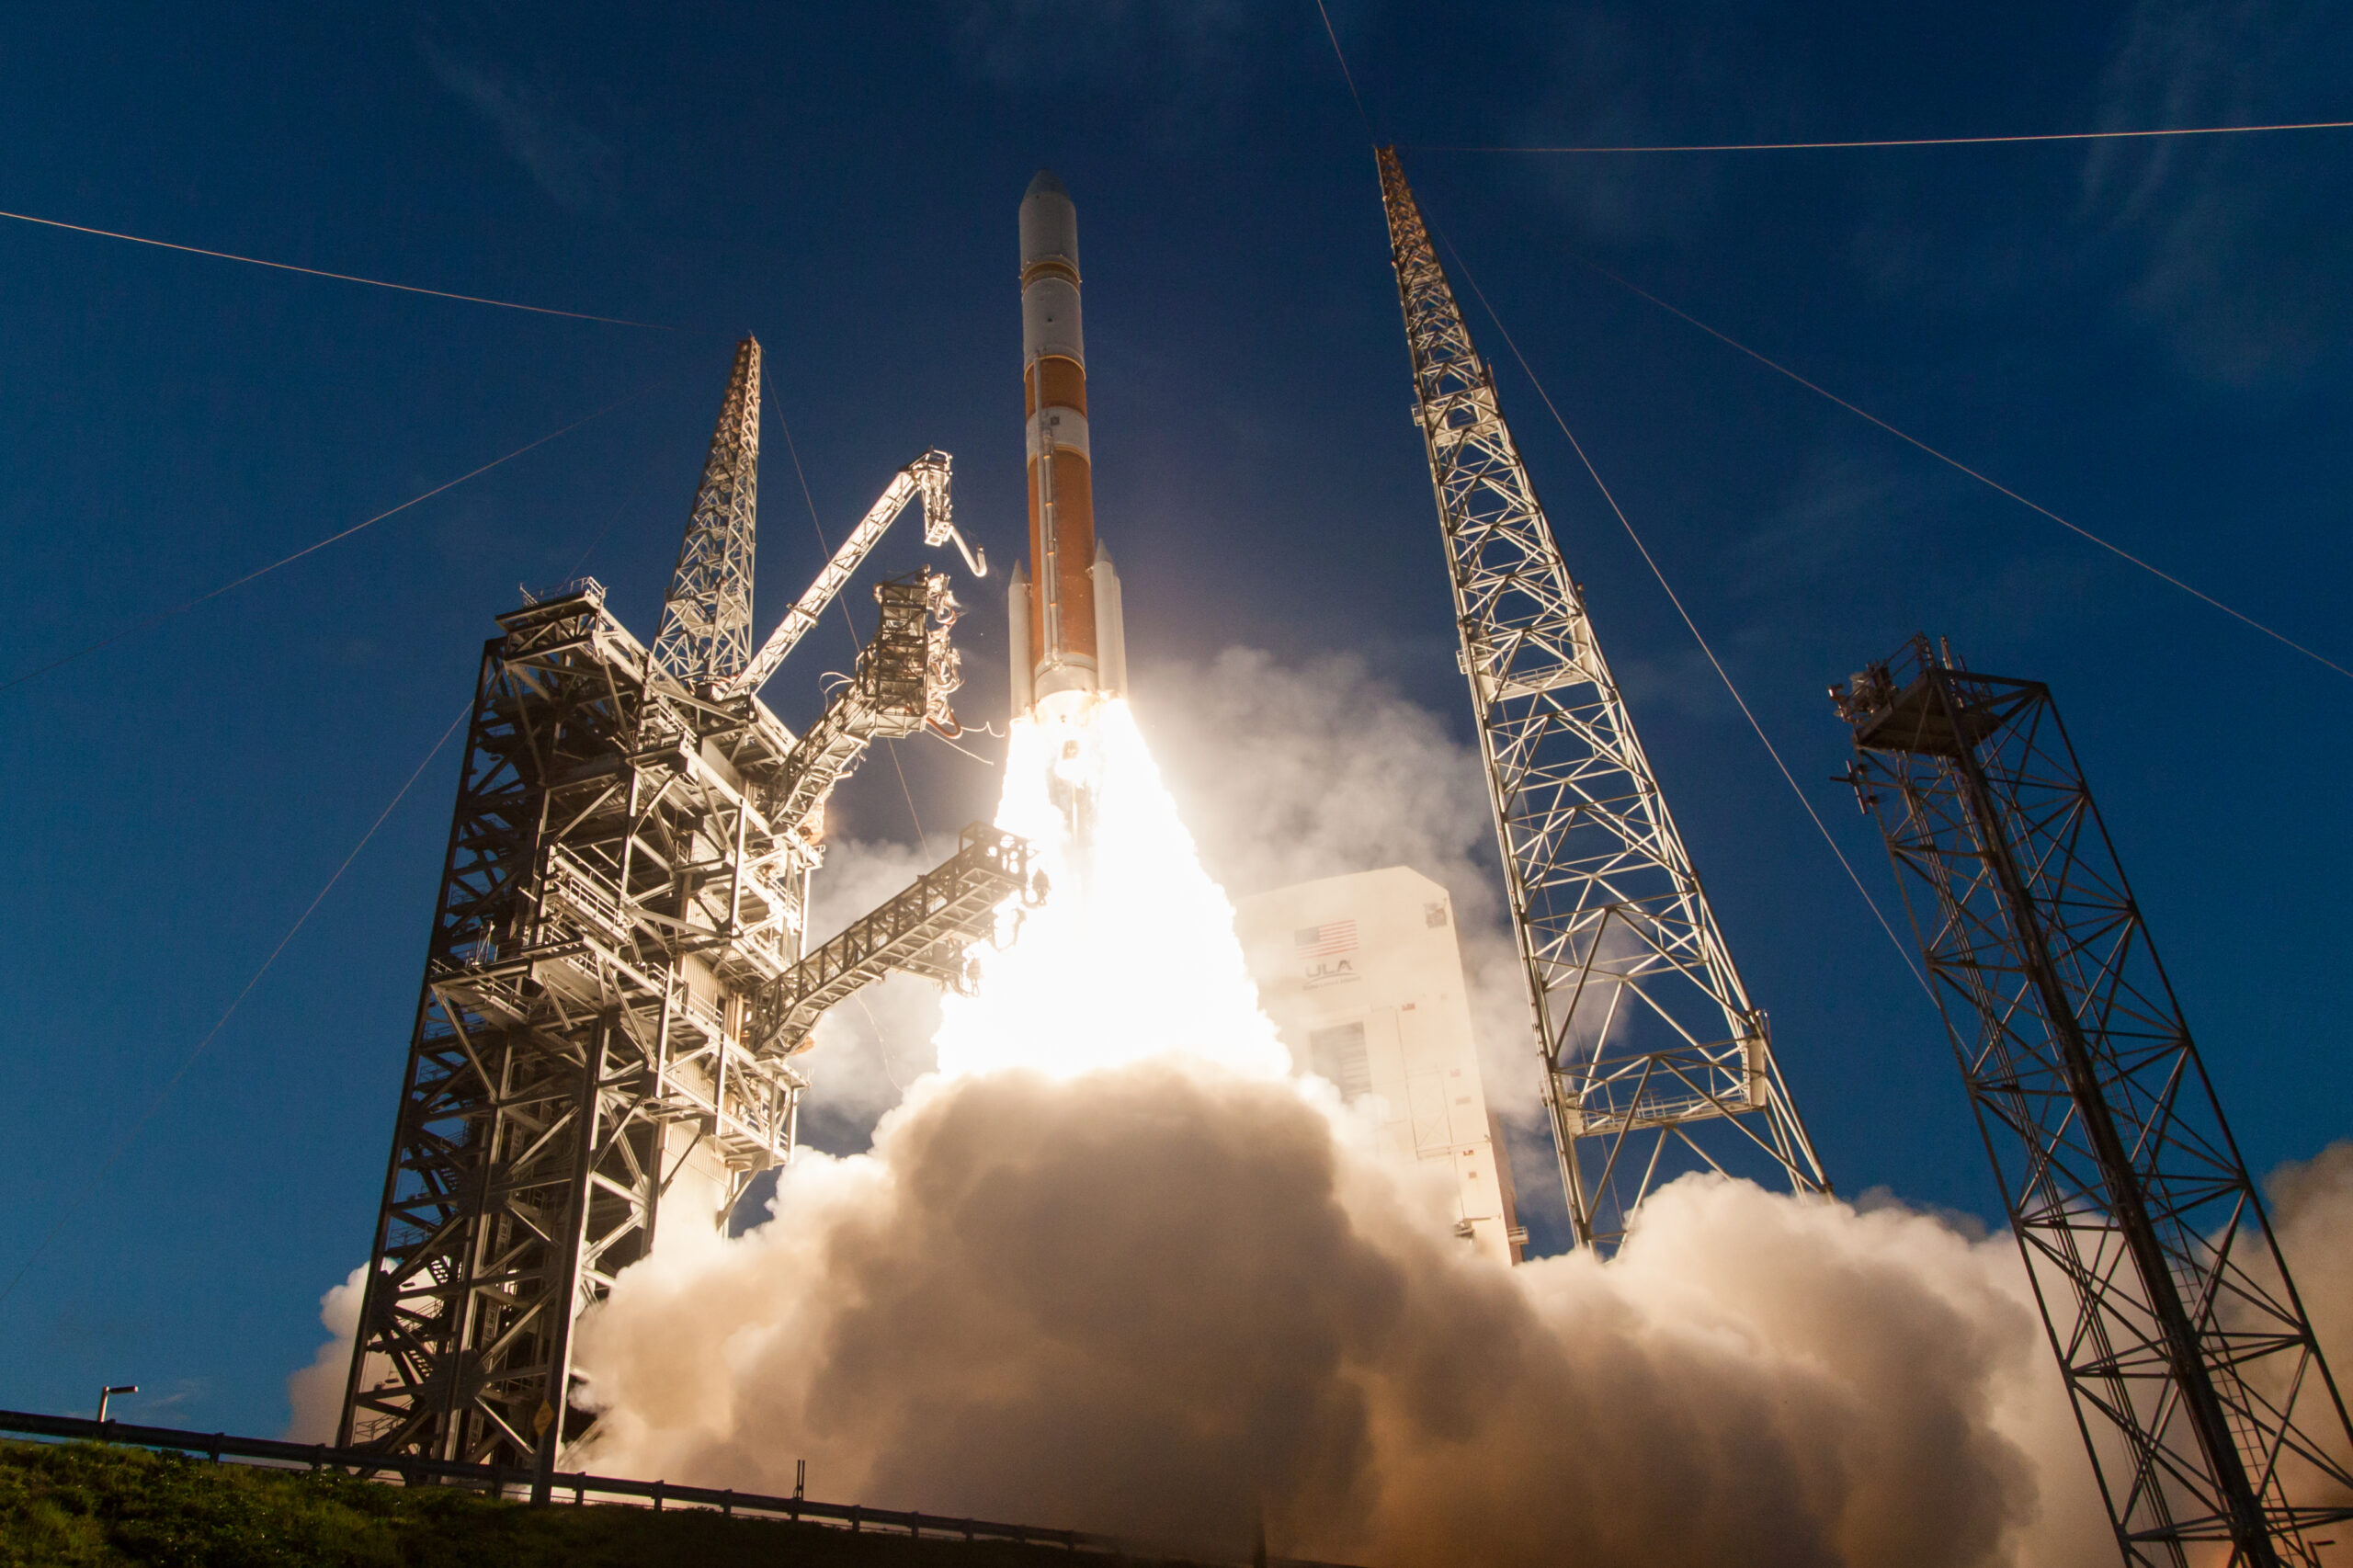 A United Launch Alliance Delta rocket launches from Kennedy Space Center